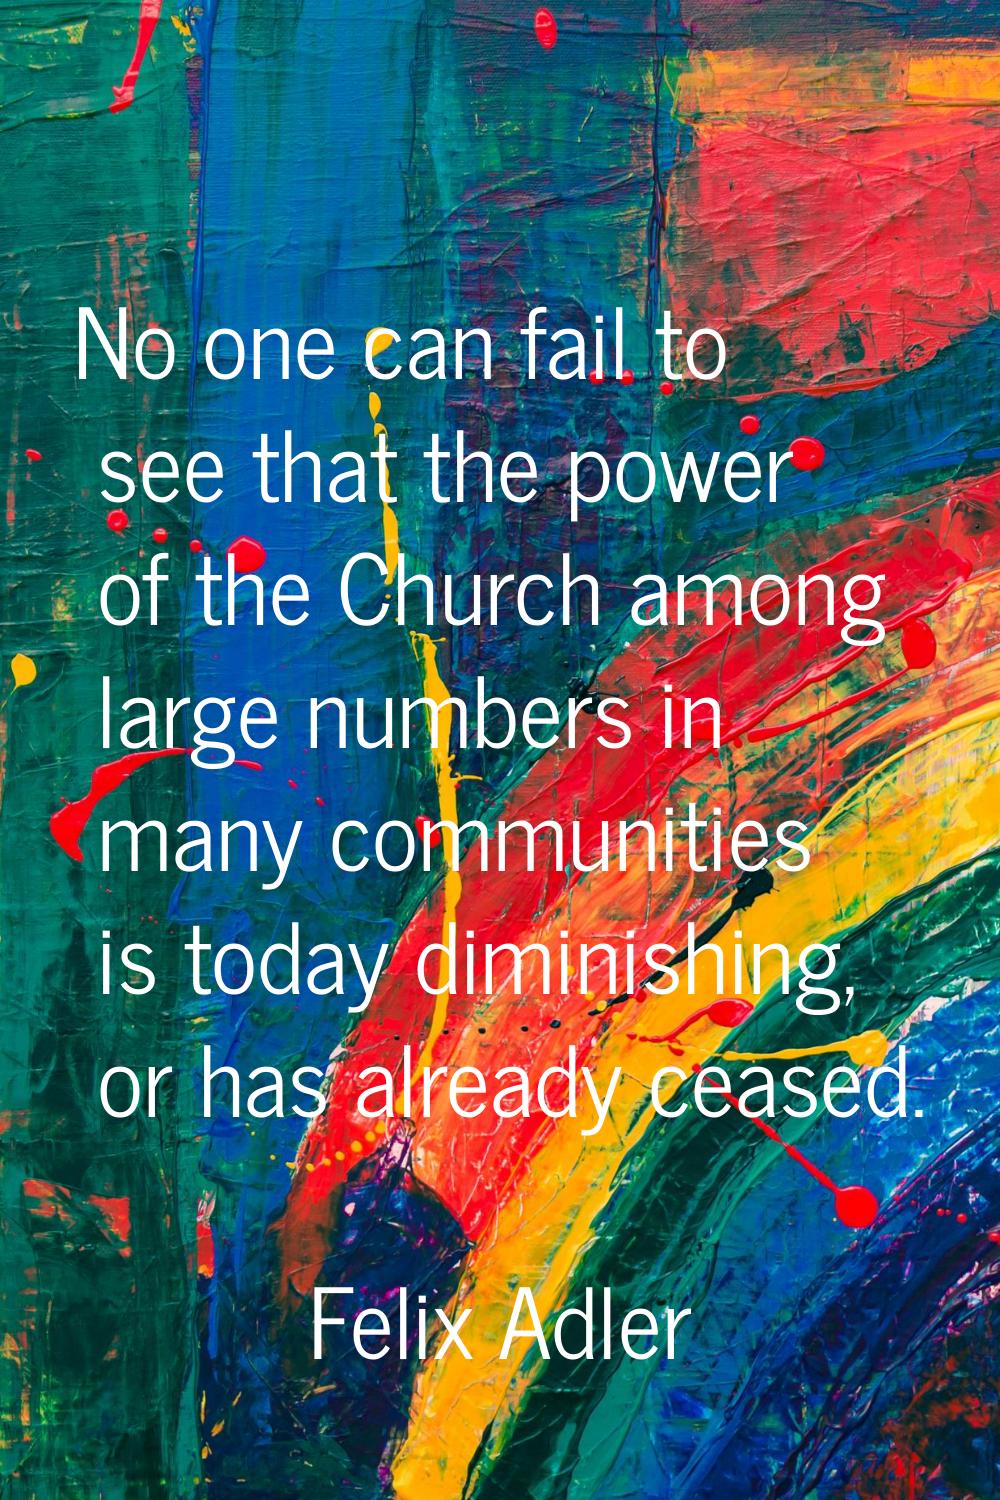 No one can fail to see that the power of the Church among large numbers in many communities is toda